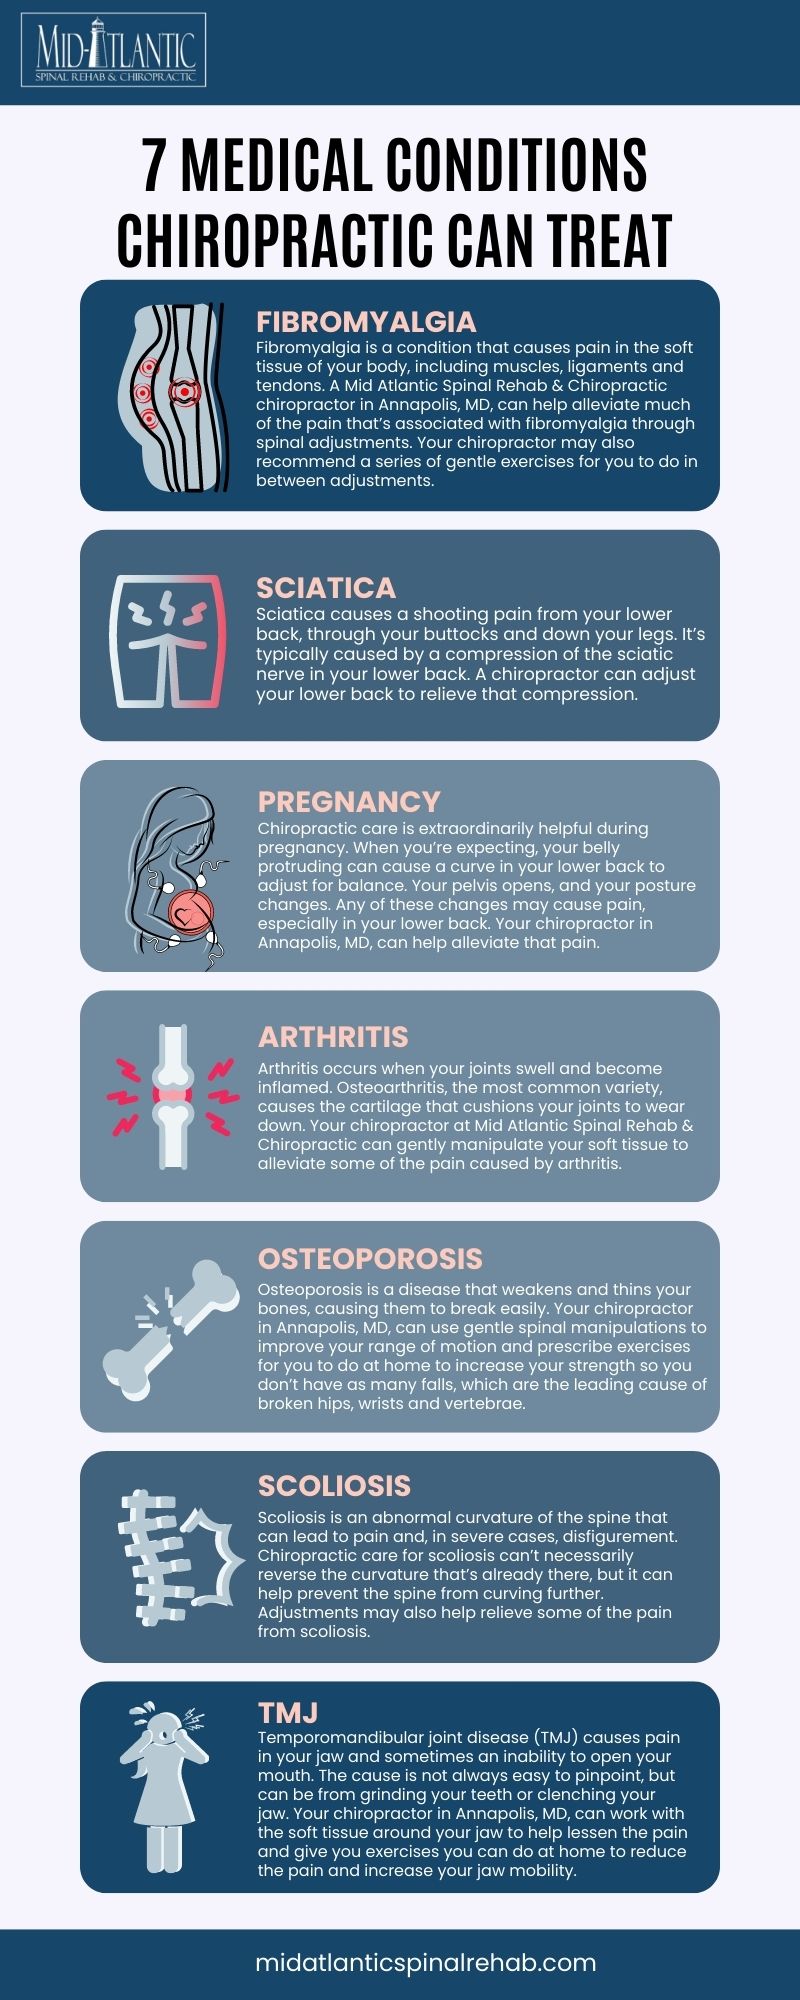 7 Medical Conditions Chiropractic Can Treat Infographic